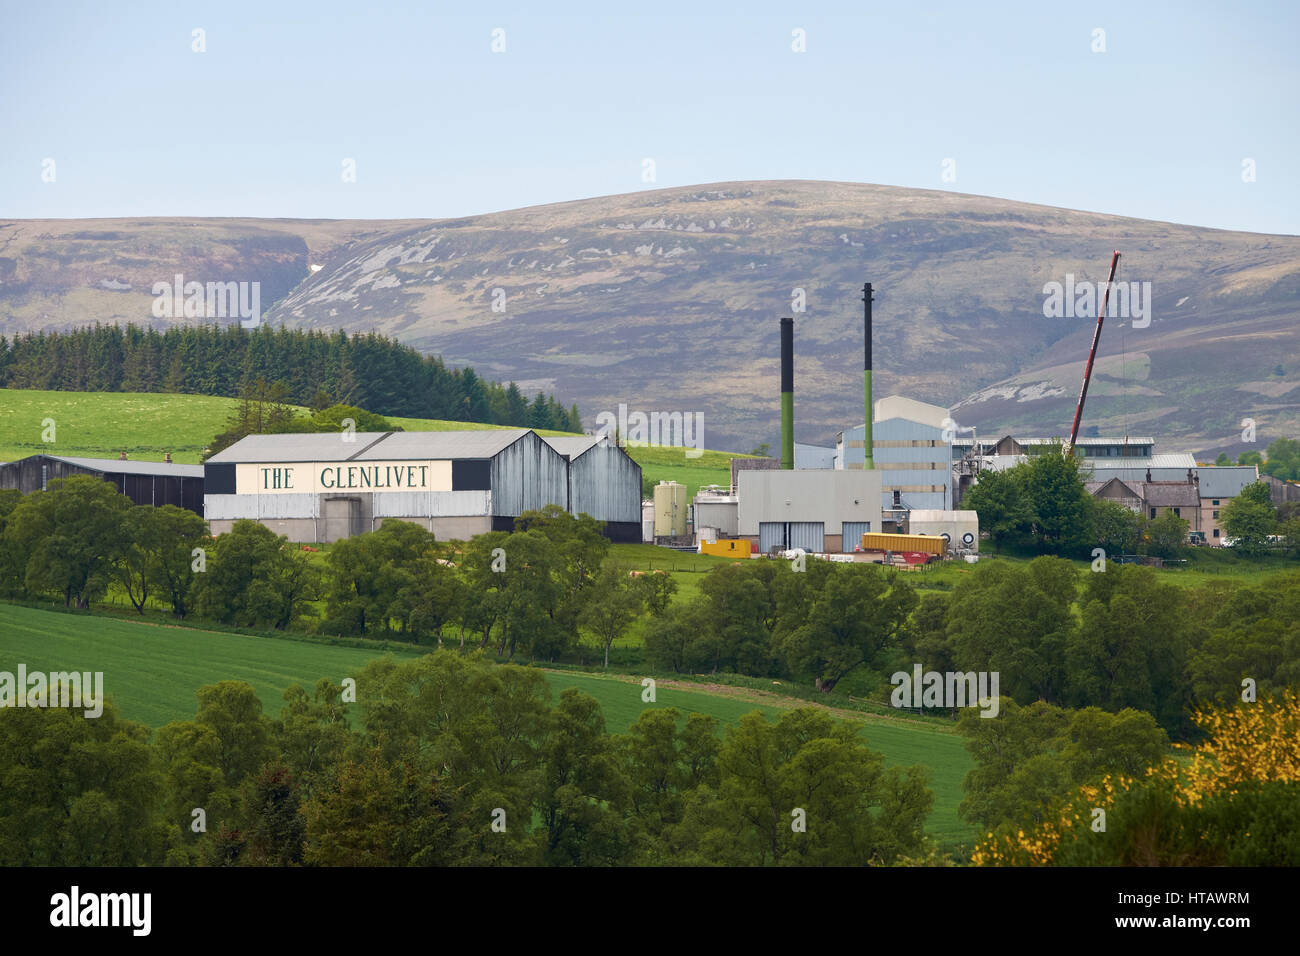 The Glenlivet whisky Distillery near the Cairngorms in the Highlands of Scotland. Stock Photo